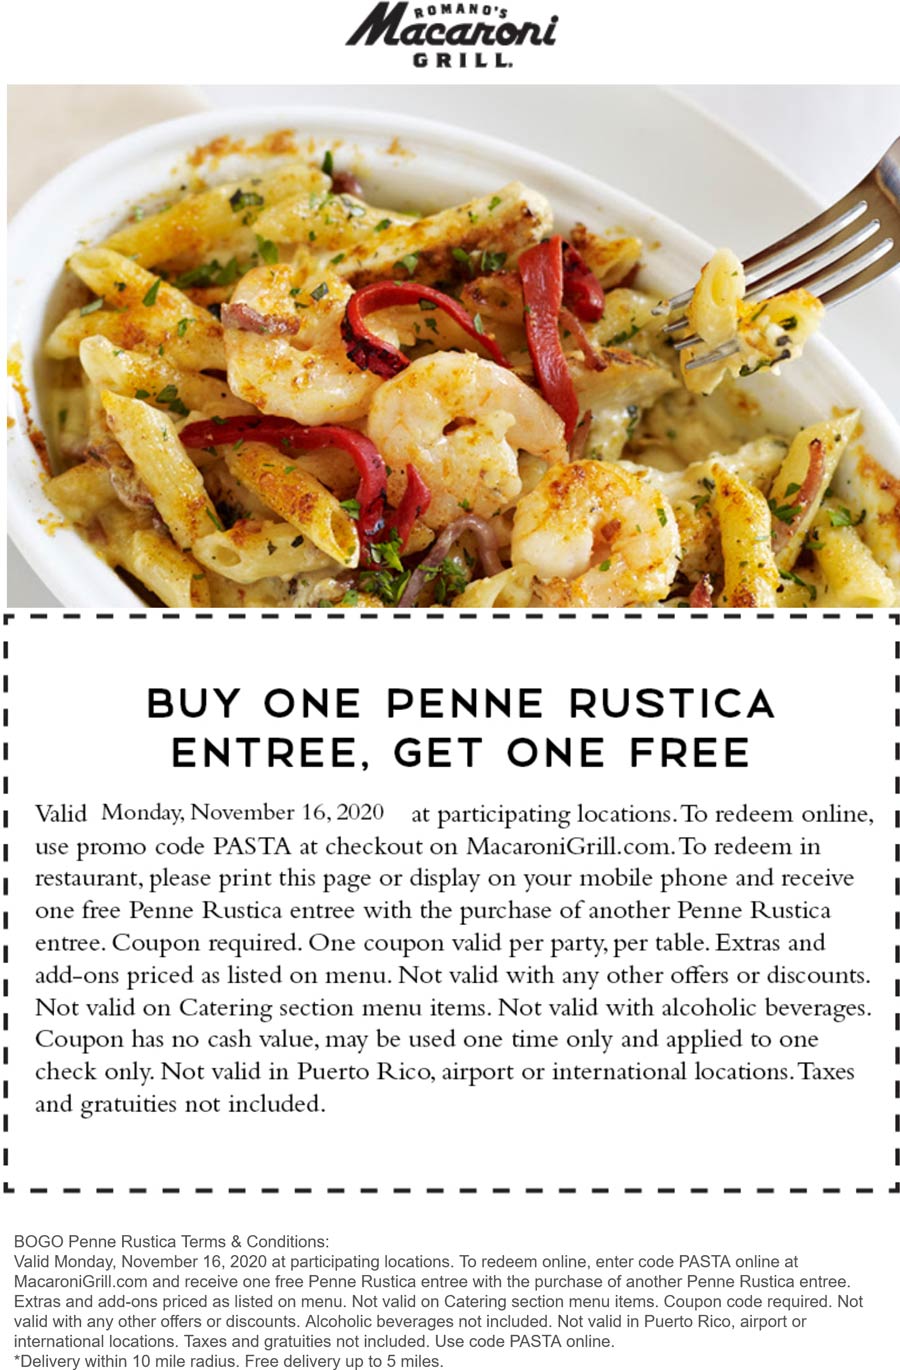 Macaroni Grill restaurants Coupon  Second penne rustica entree free today at Romanos Macaroni Grill #macaronigrill 